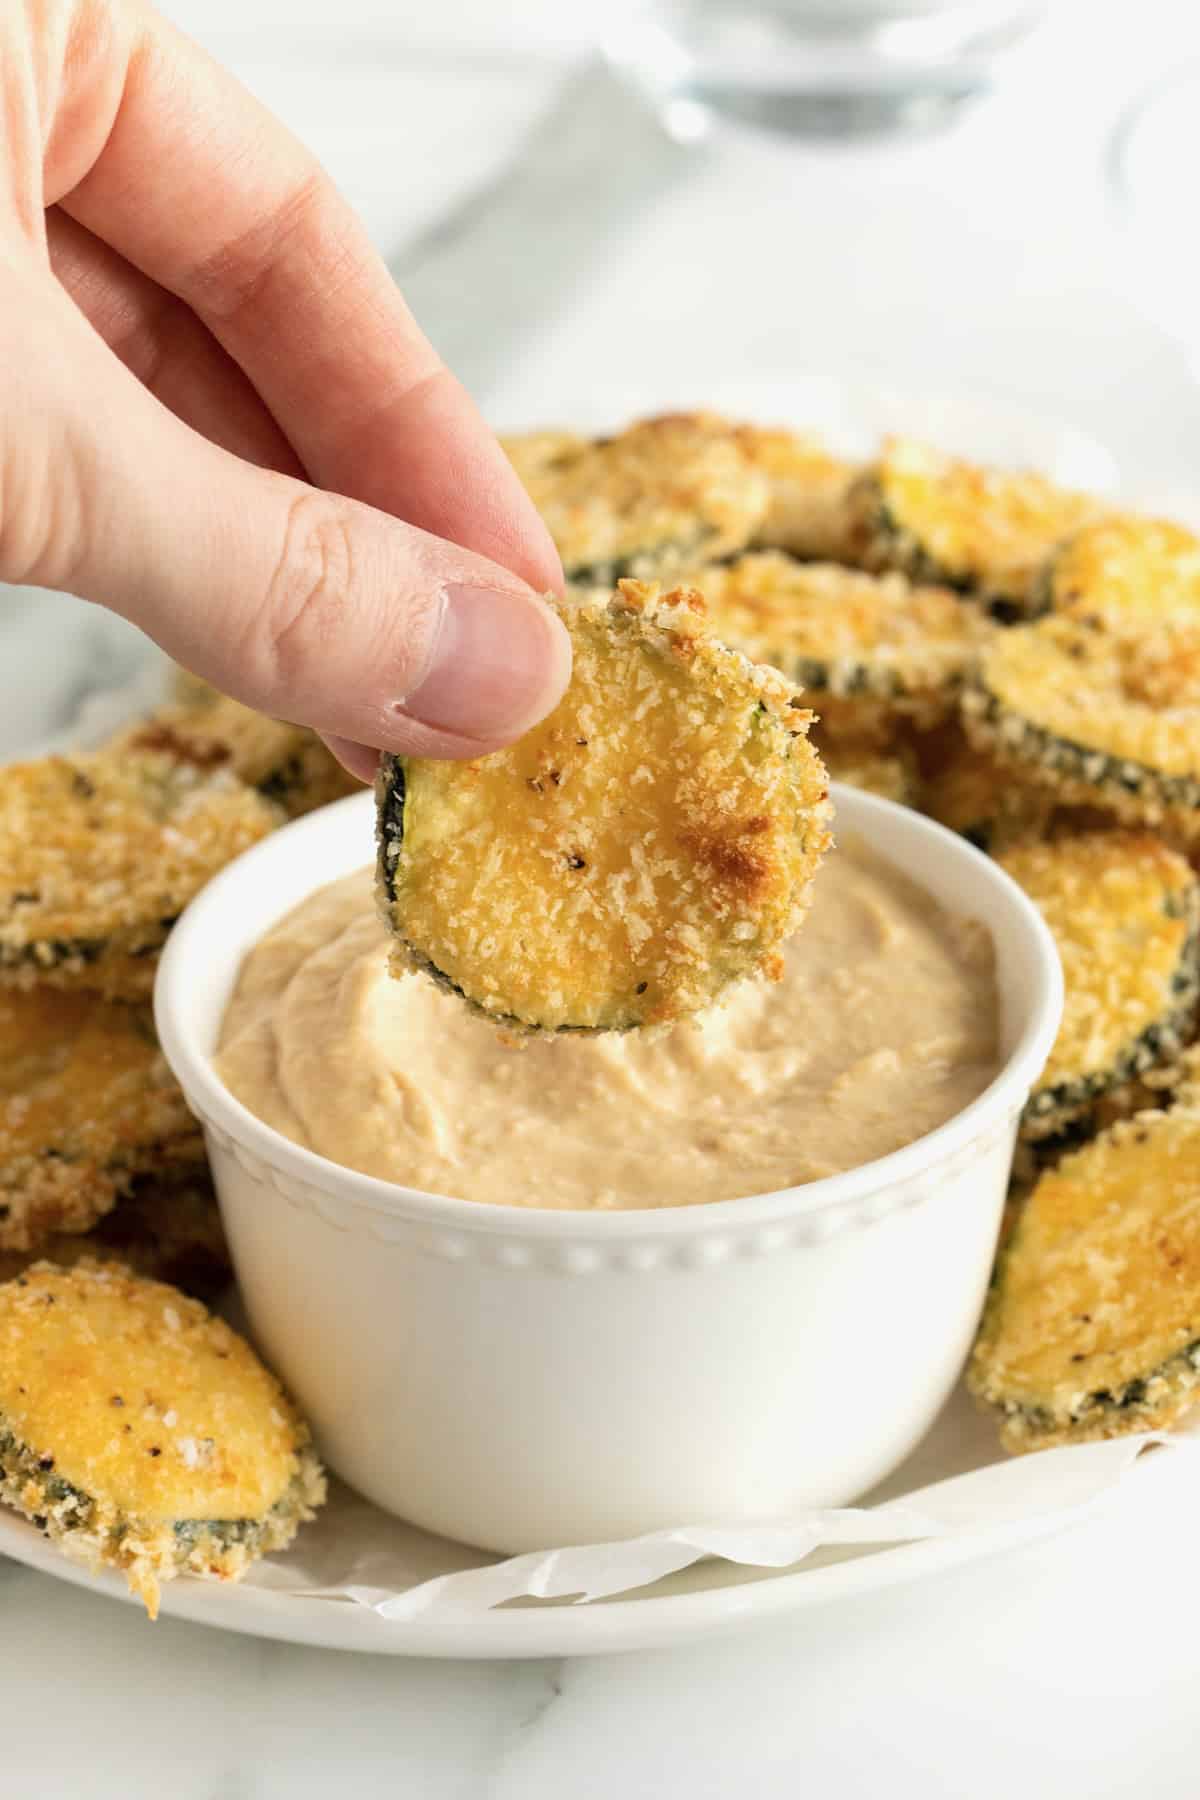 An oblong white serving platter of zucchini chips surrounding a bowl of hummus.